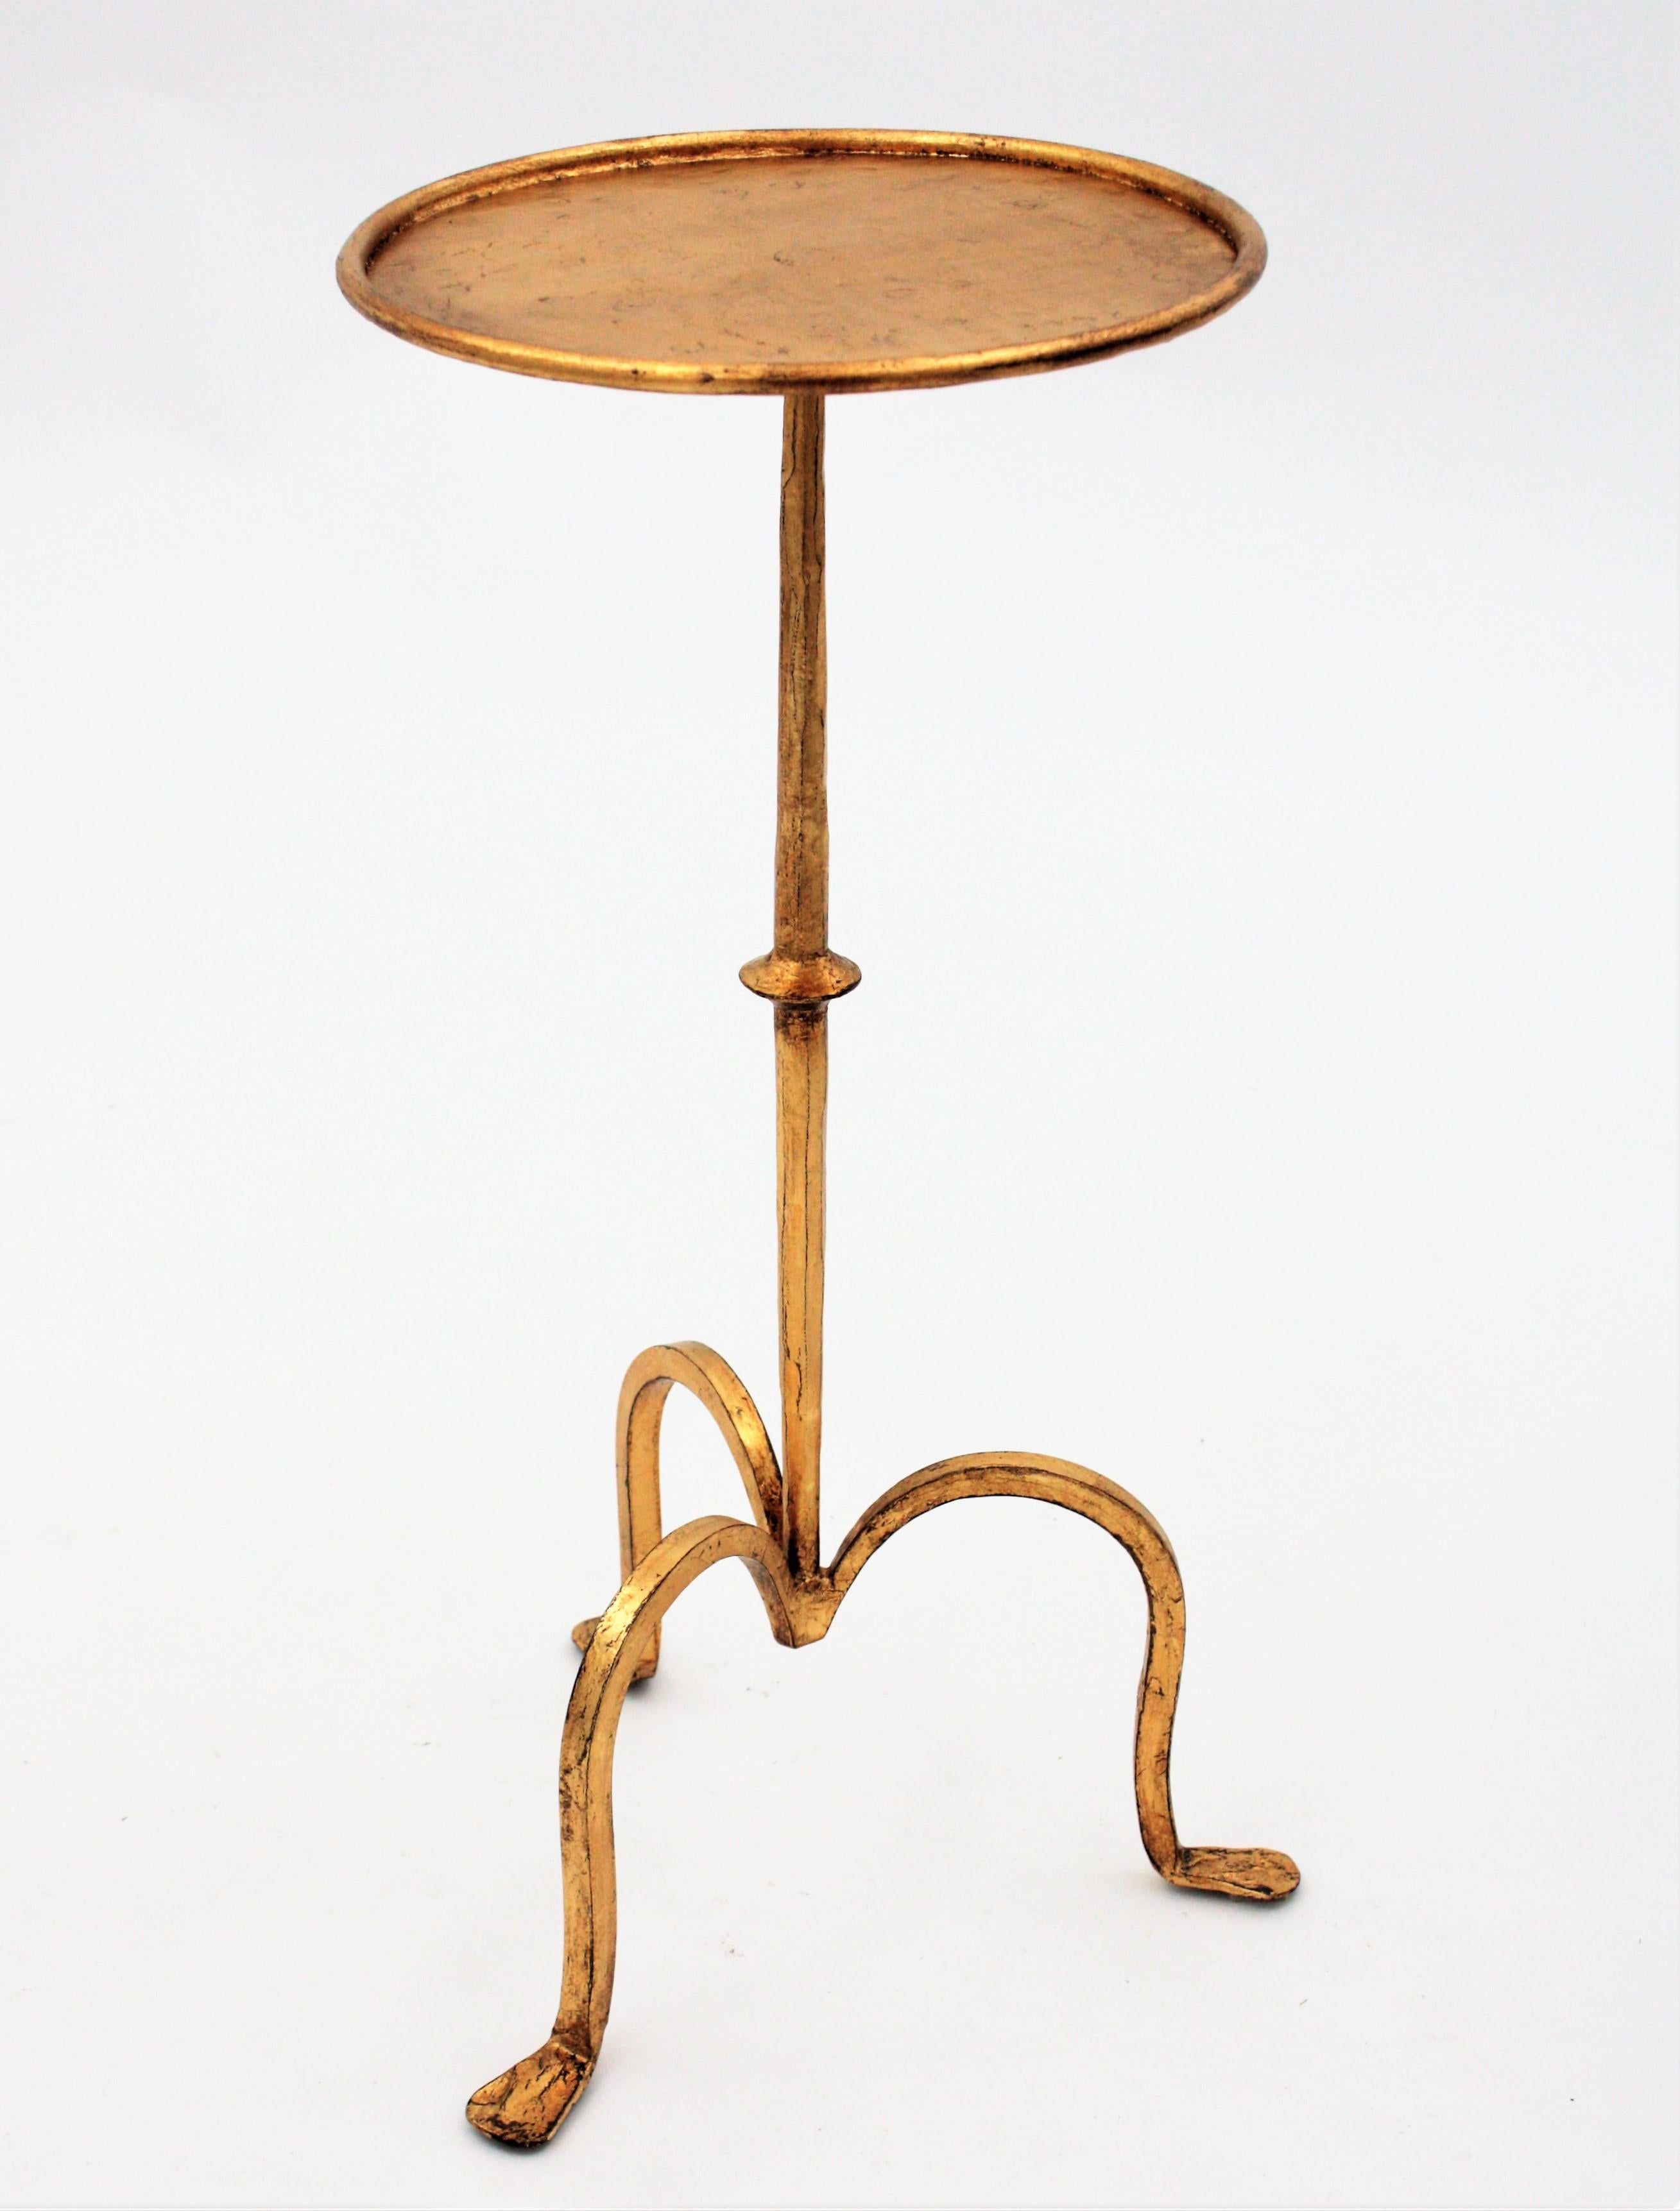 20th Century Spanish 1950s Small Hand-Hammered Gilt Iron End Table / Gueridon / Drinks Table